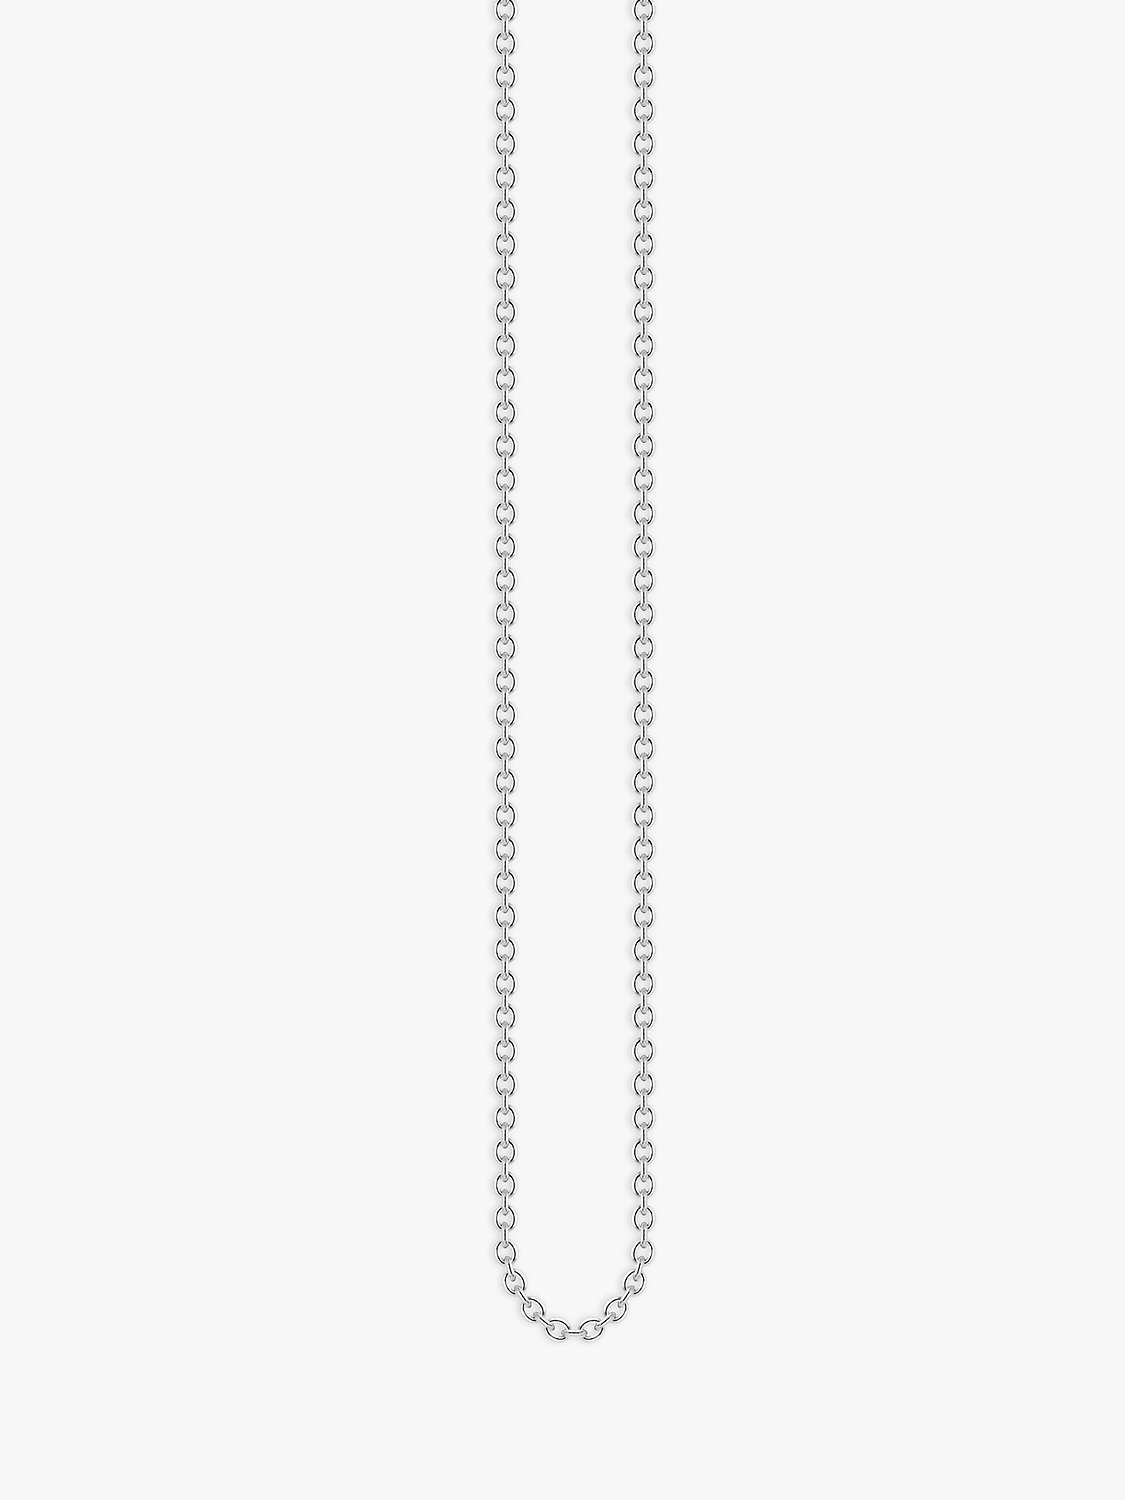 Buy THOMAS SABO Belcher Chain Necklace, Silver Online at johnlewis.com